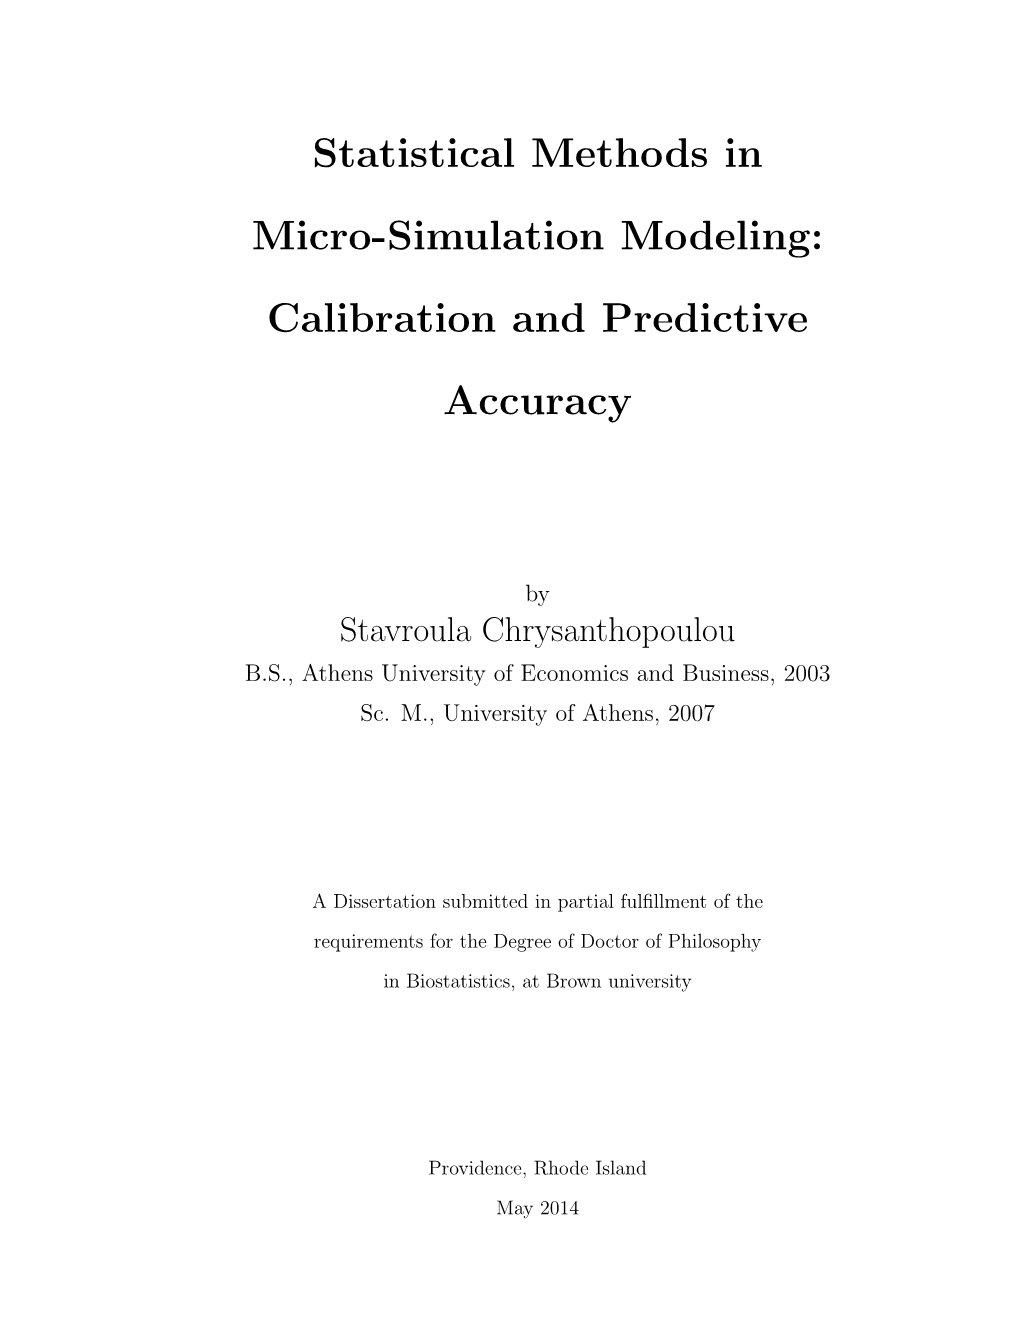 Statistical Methods in Micro-Simulation Modeling: Calibration and Predictive Accuracy